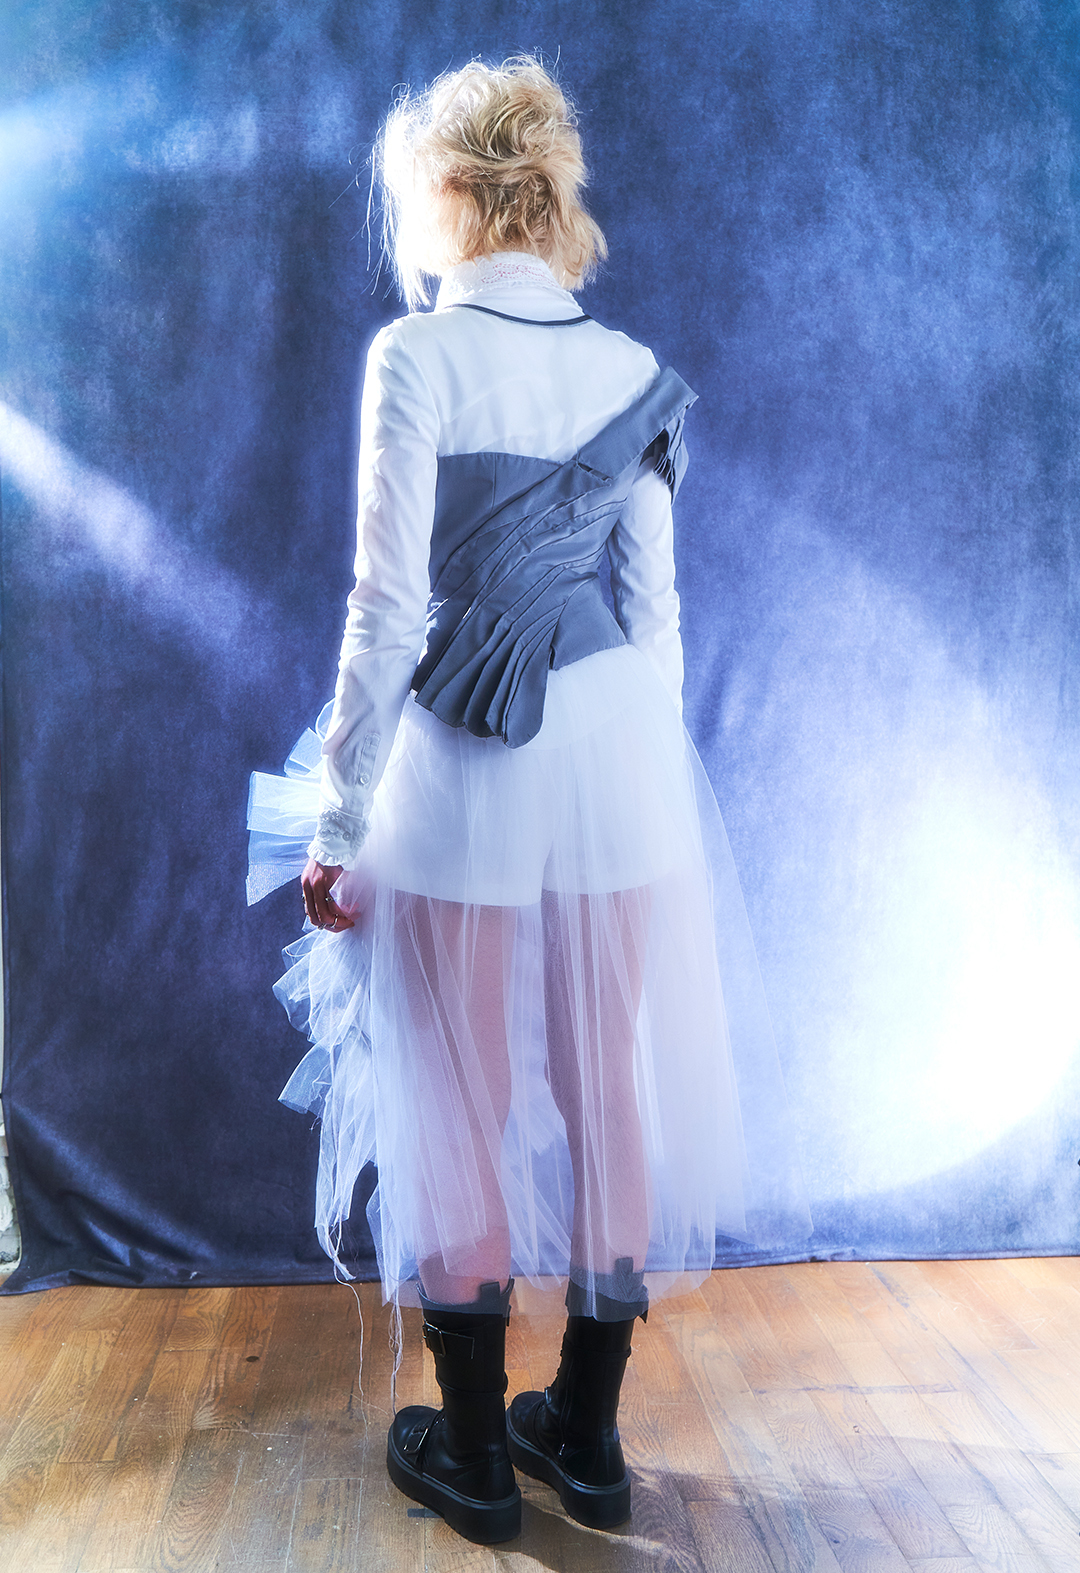 Back view of the design. The blonde model stands in front of a blue backdrop in a sheer dress worn over a blouse and short with an attached jacket.